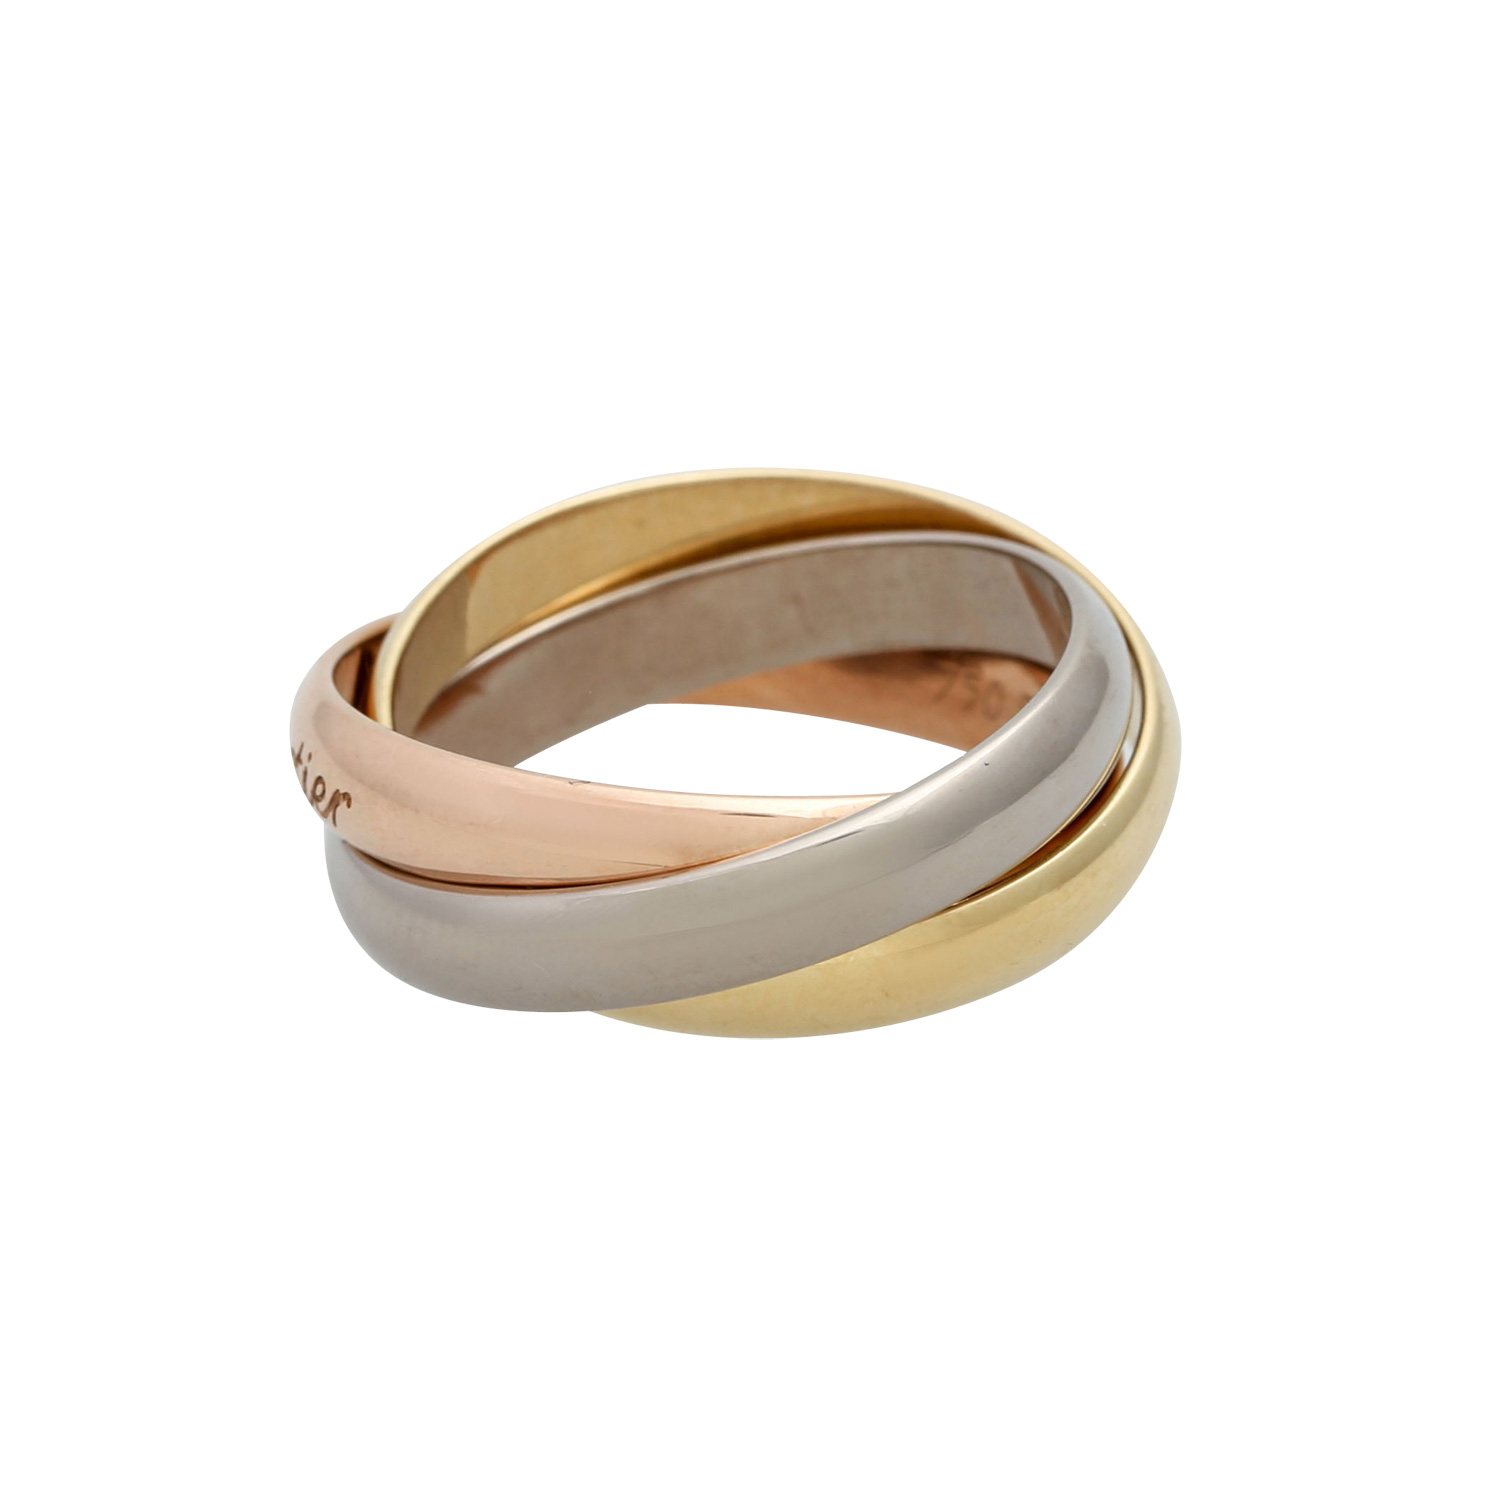 CARTIER Ring "Trinity", - Image 3 of 4